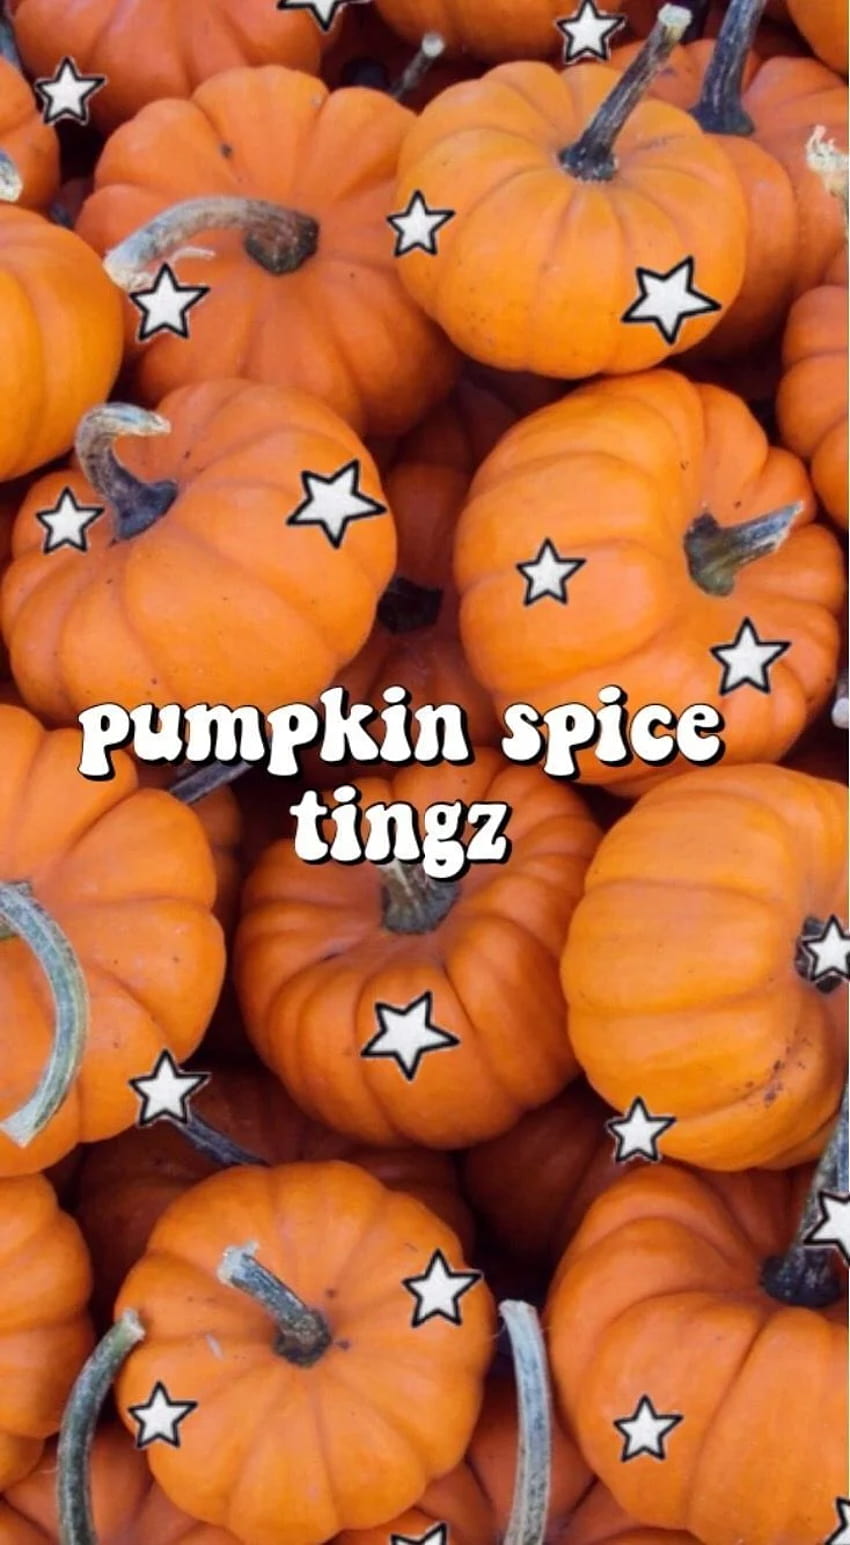 preppy haloween wallpapers for iphoneTikTok Search